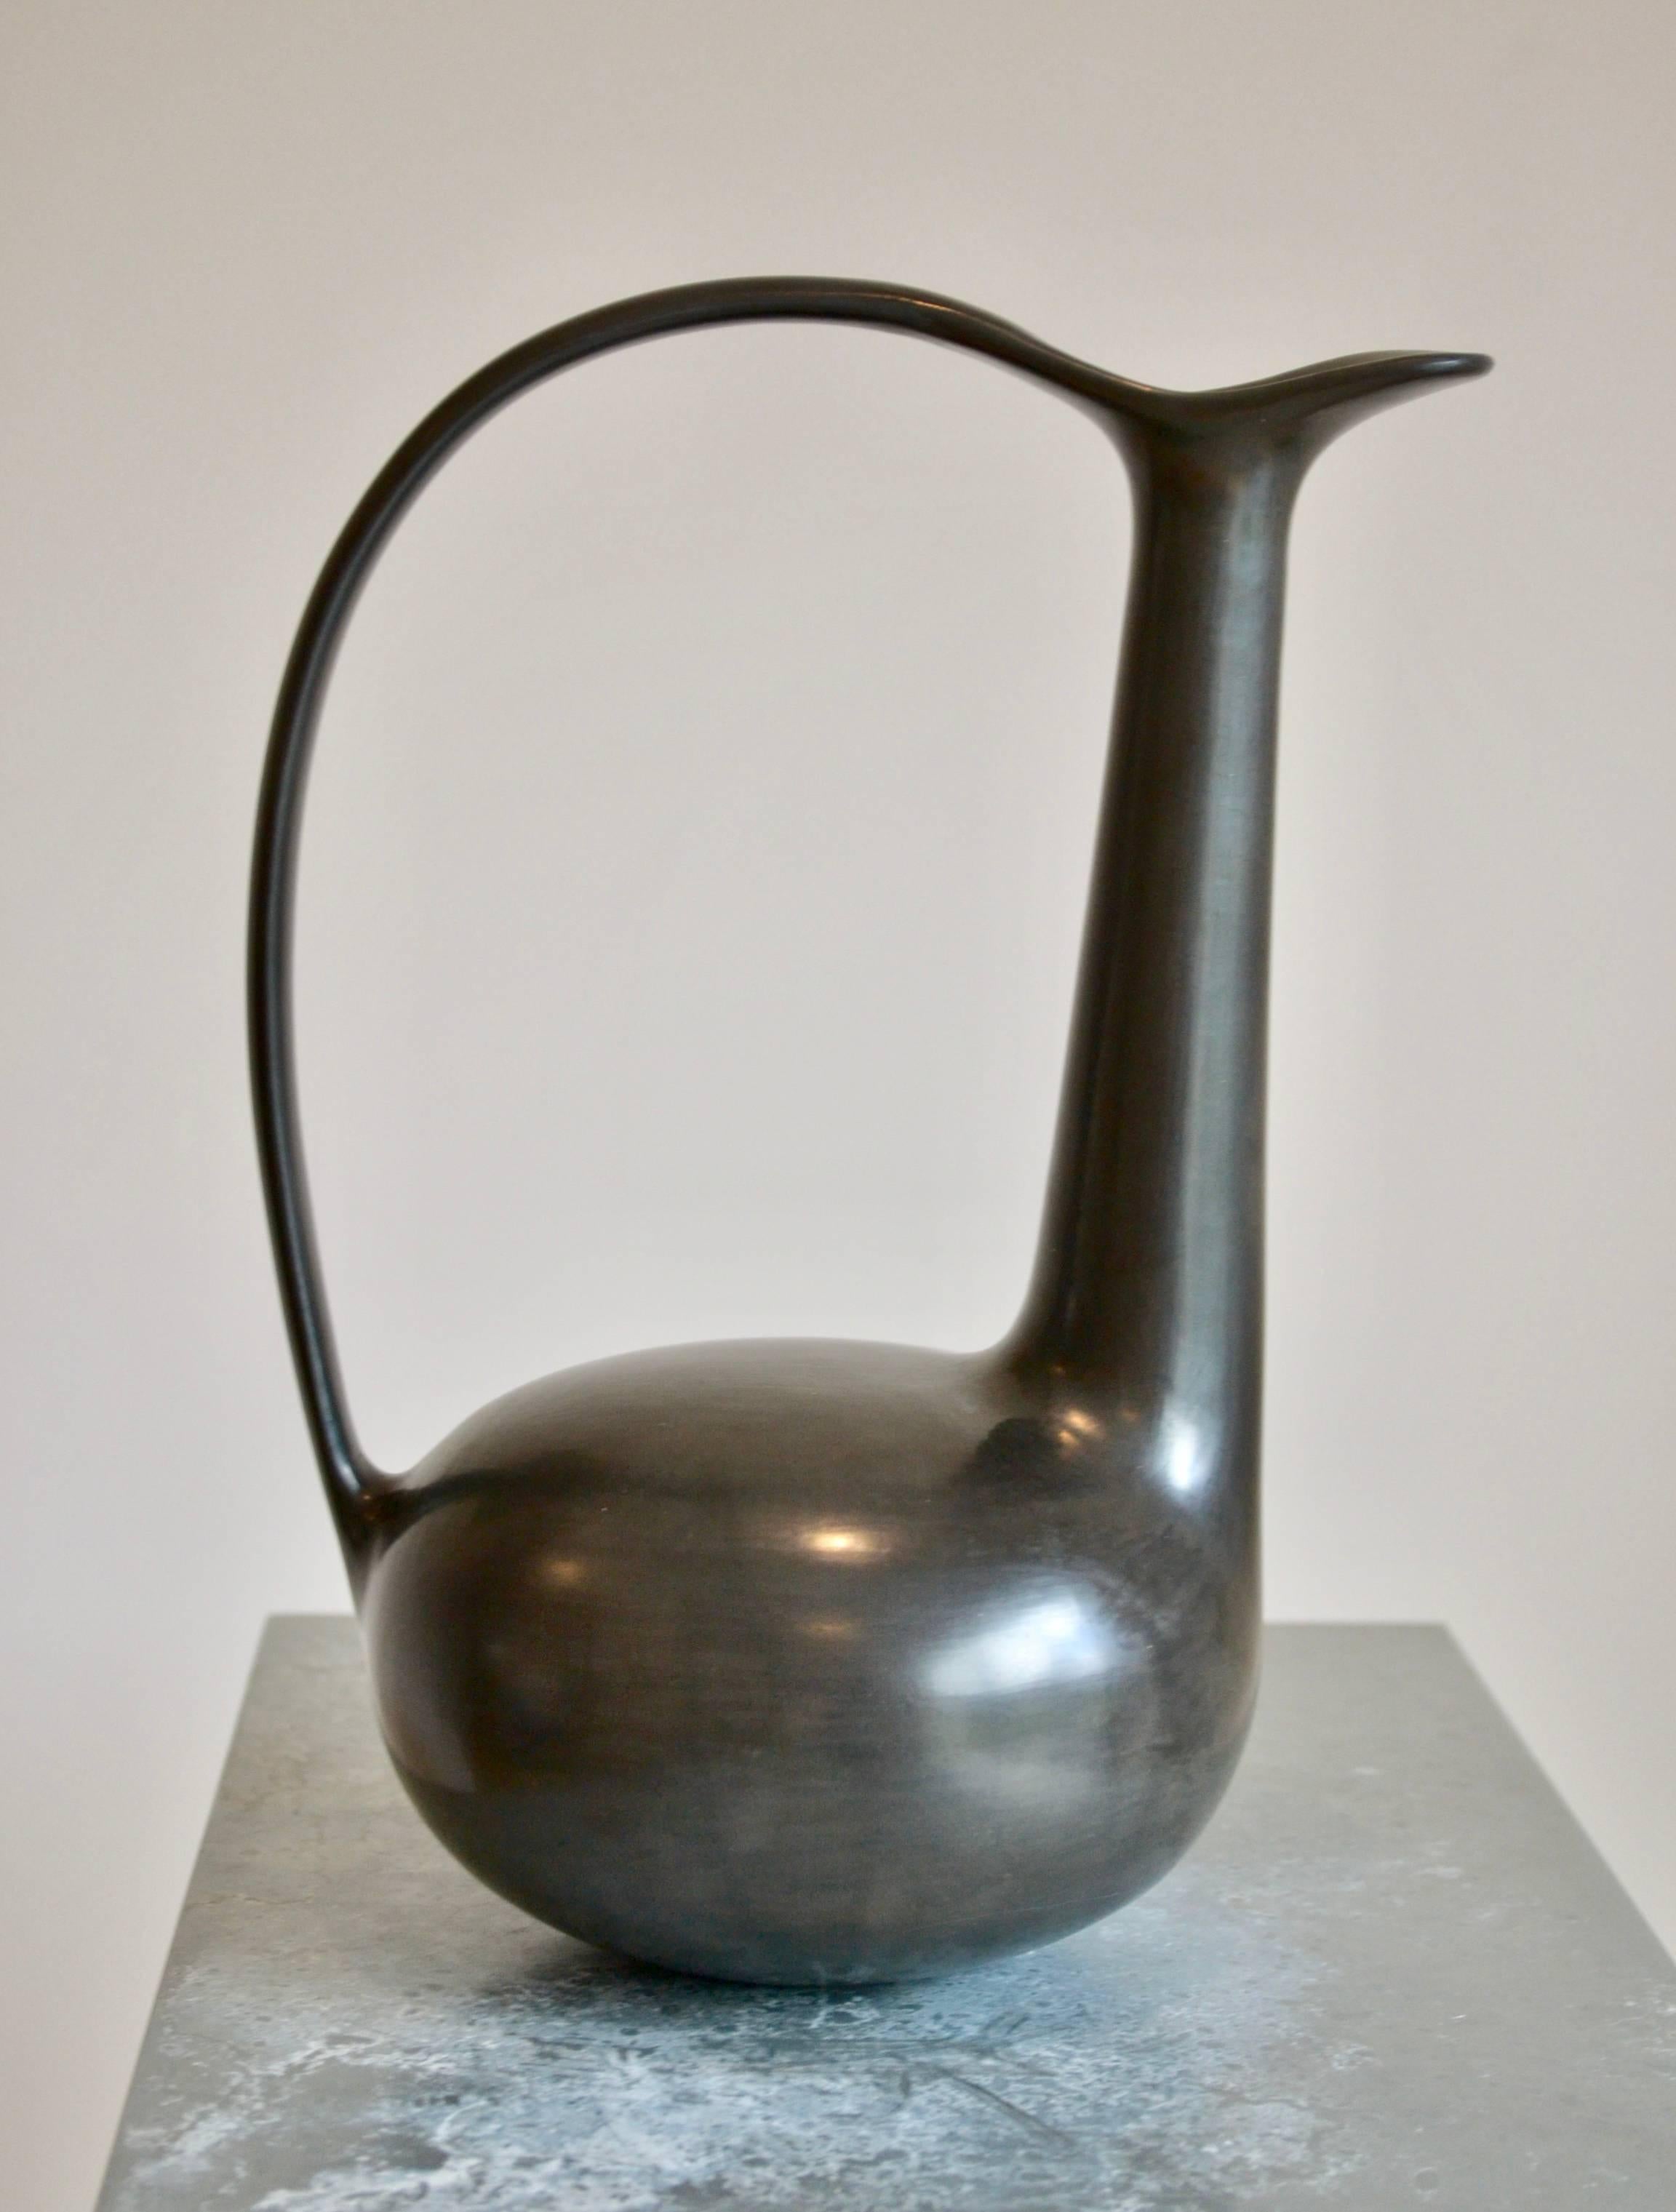 Bucchero Vase designed  by Gio Ponti and by the great Italian Artisan Carlo Alberto Rossi of the 40's.

The bucchero is a special clay, from the Etruscan times, was dried in open air and ,after baked in oven at very high temperature, which removes